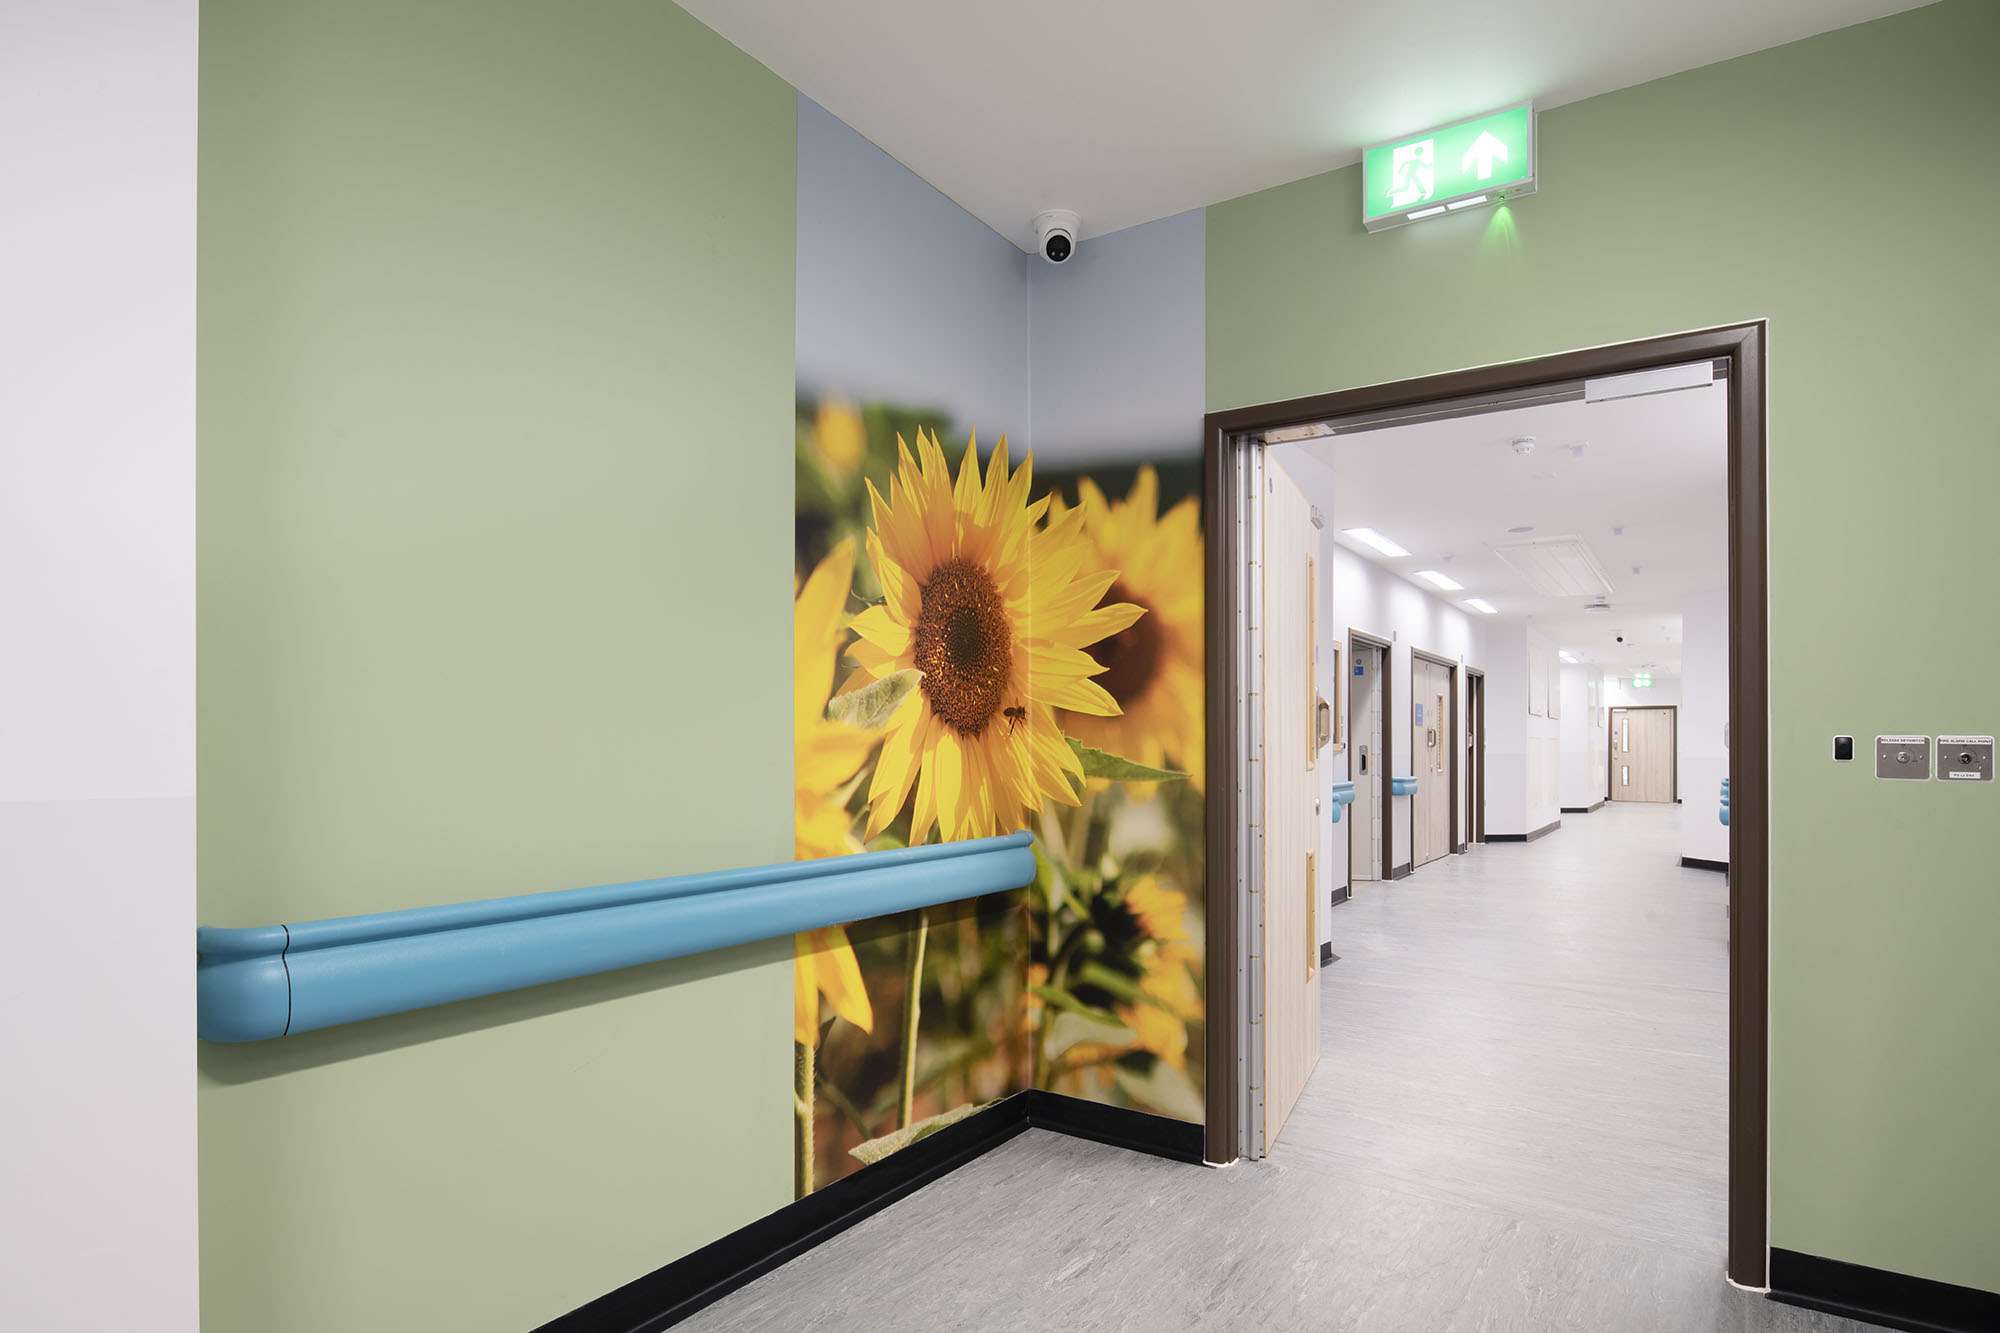 Photo of the inside of a corridor. The walls are a pale green and there is a large art print of some sunflowers on the wall.